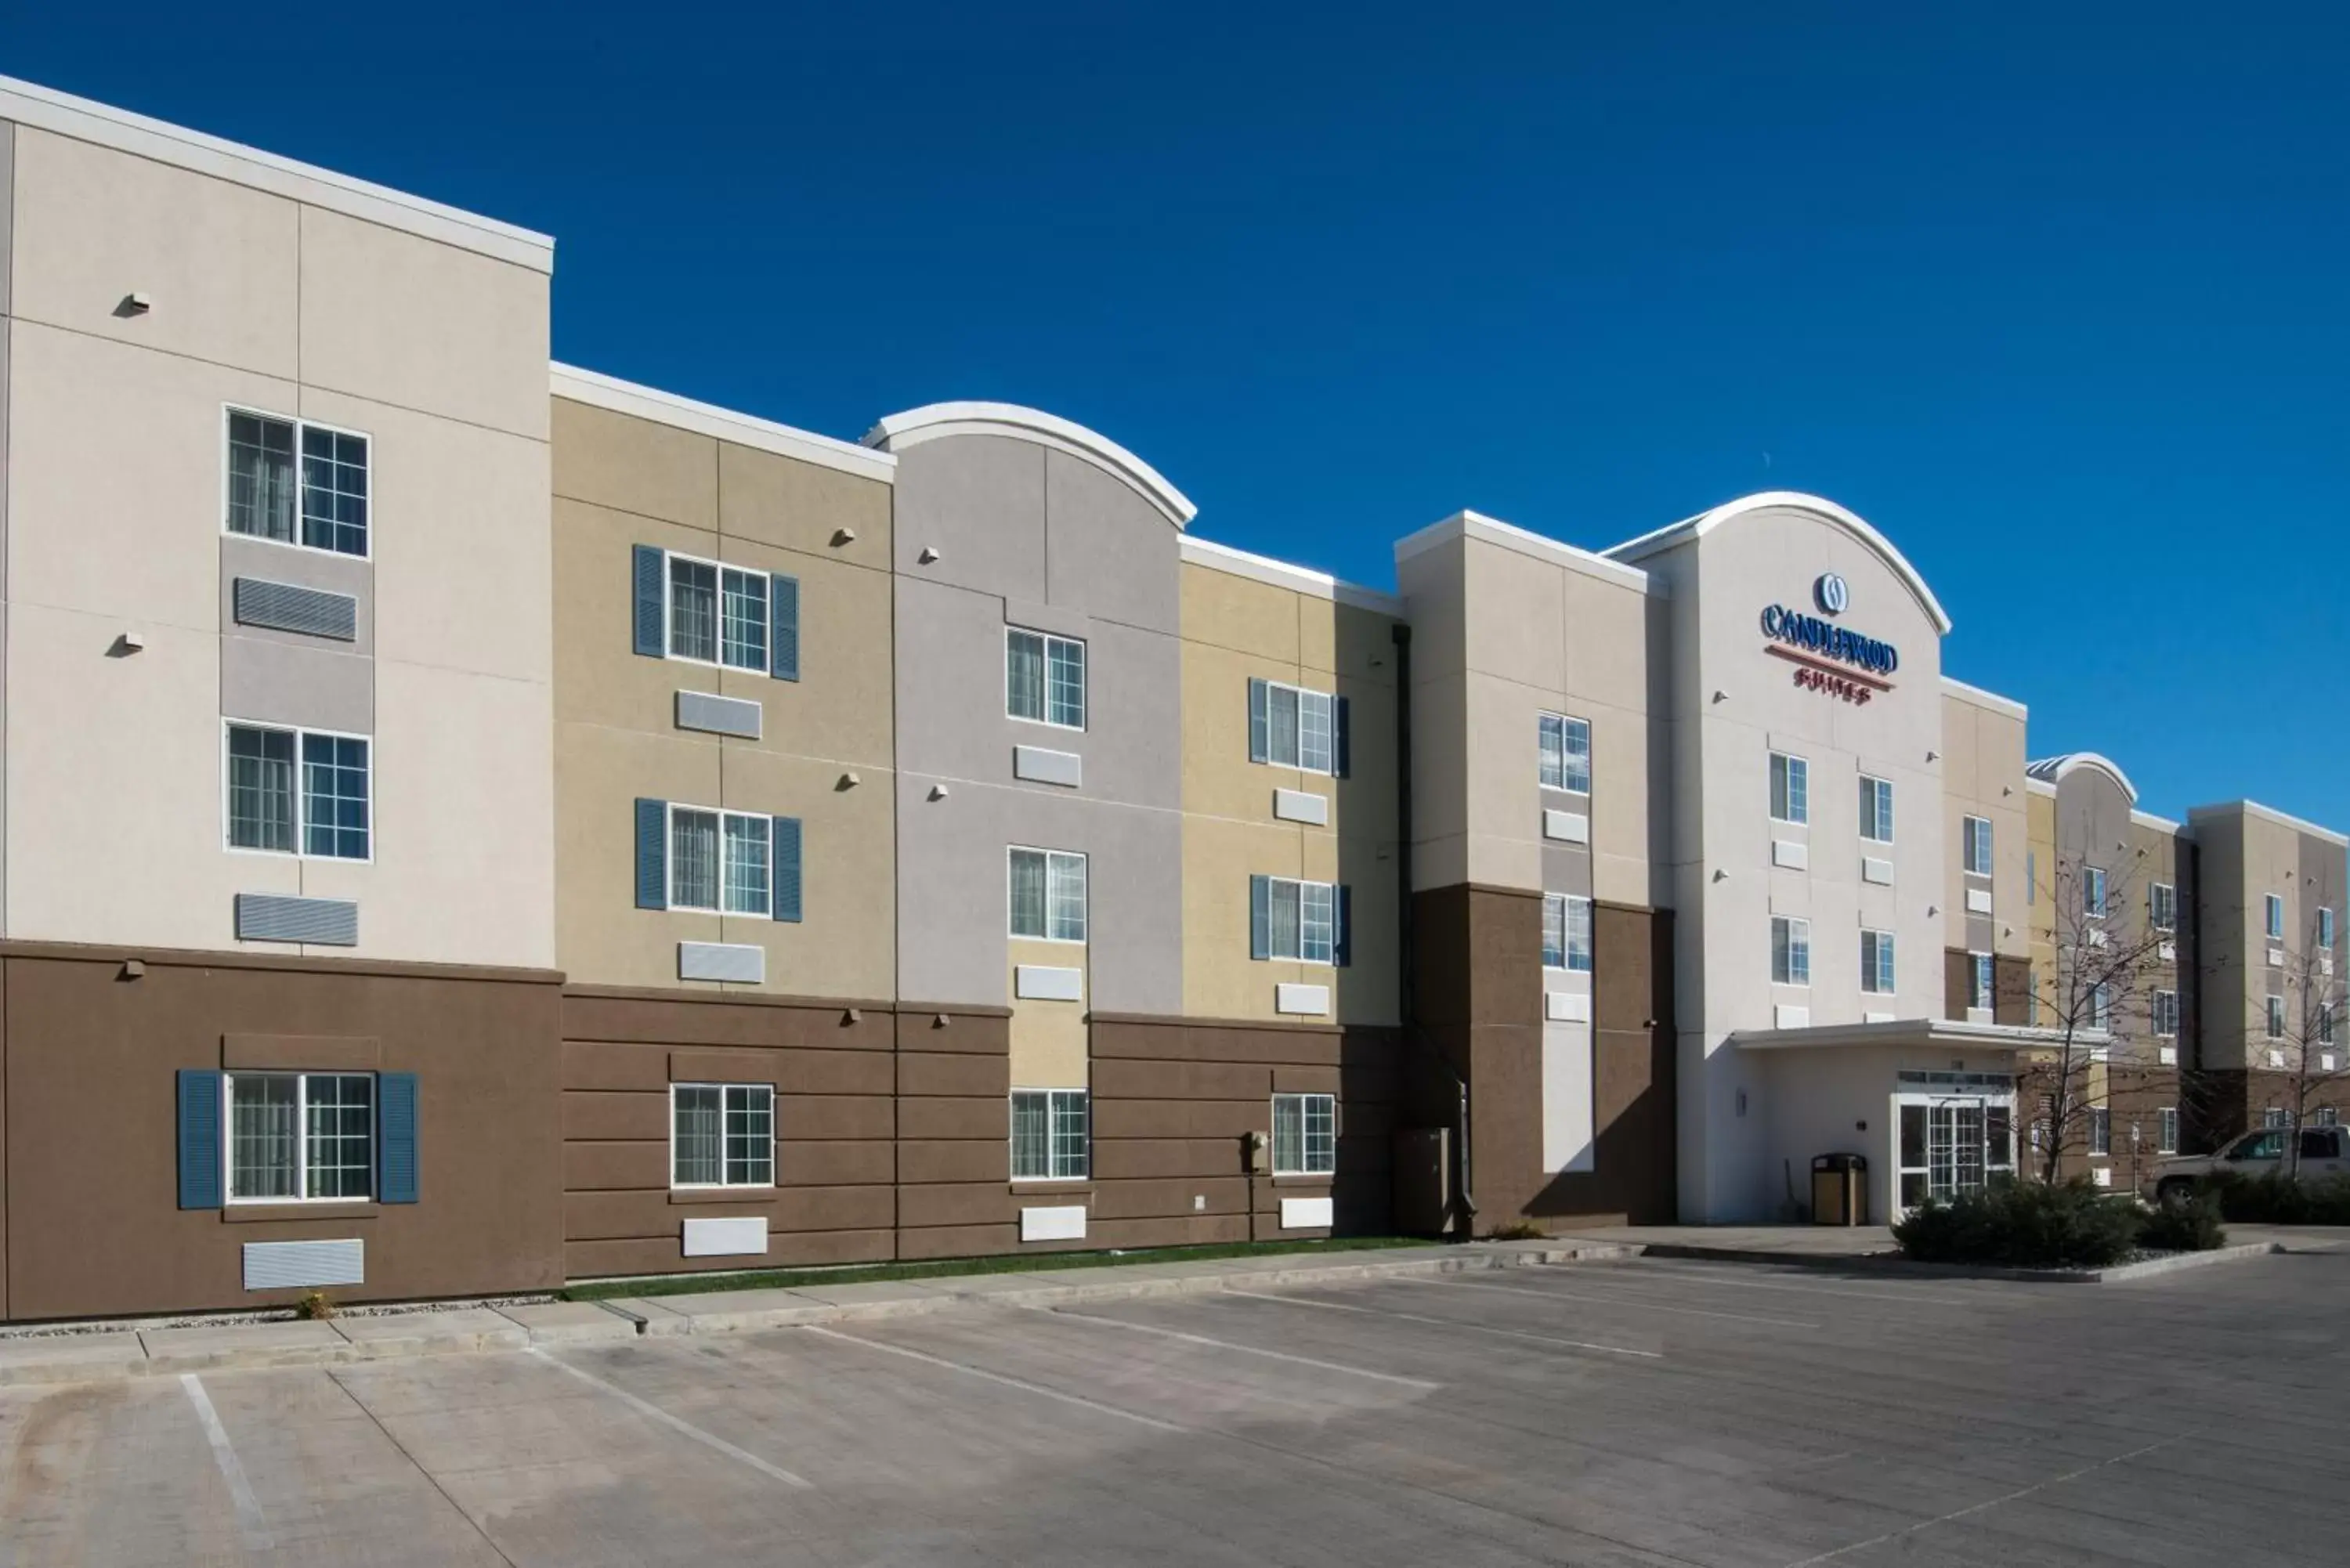 Property Building in Candlewood Suites Sheridan, an IHG Hotel